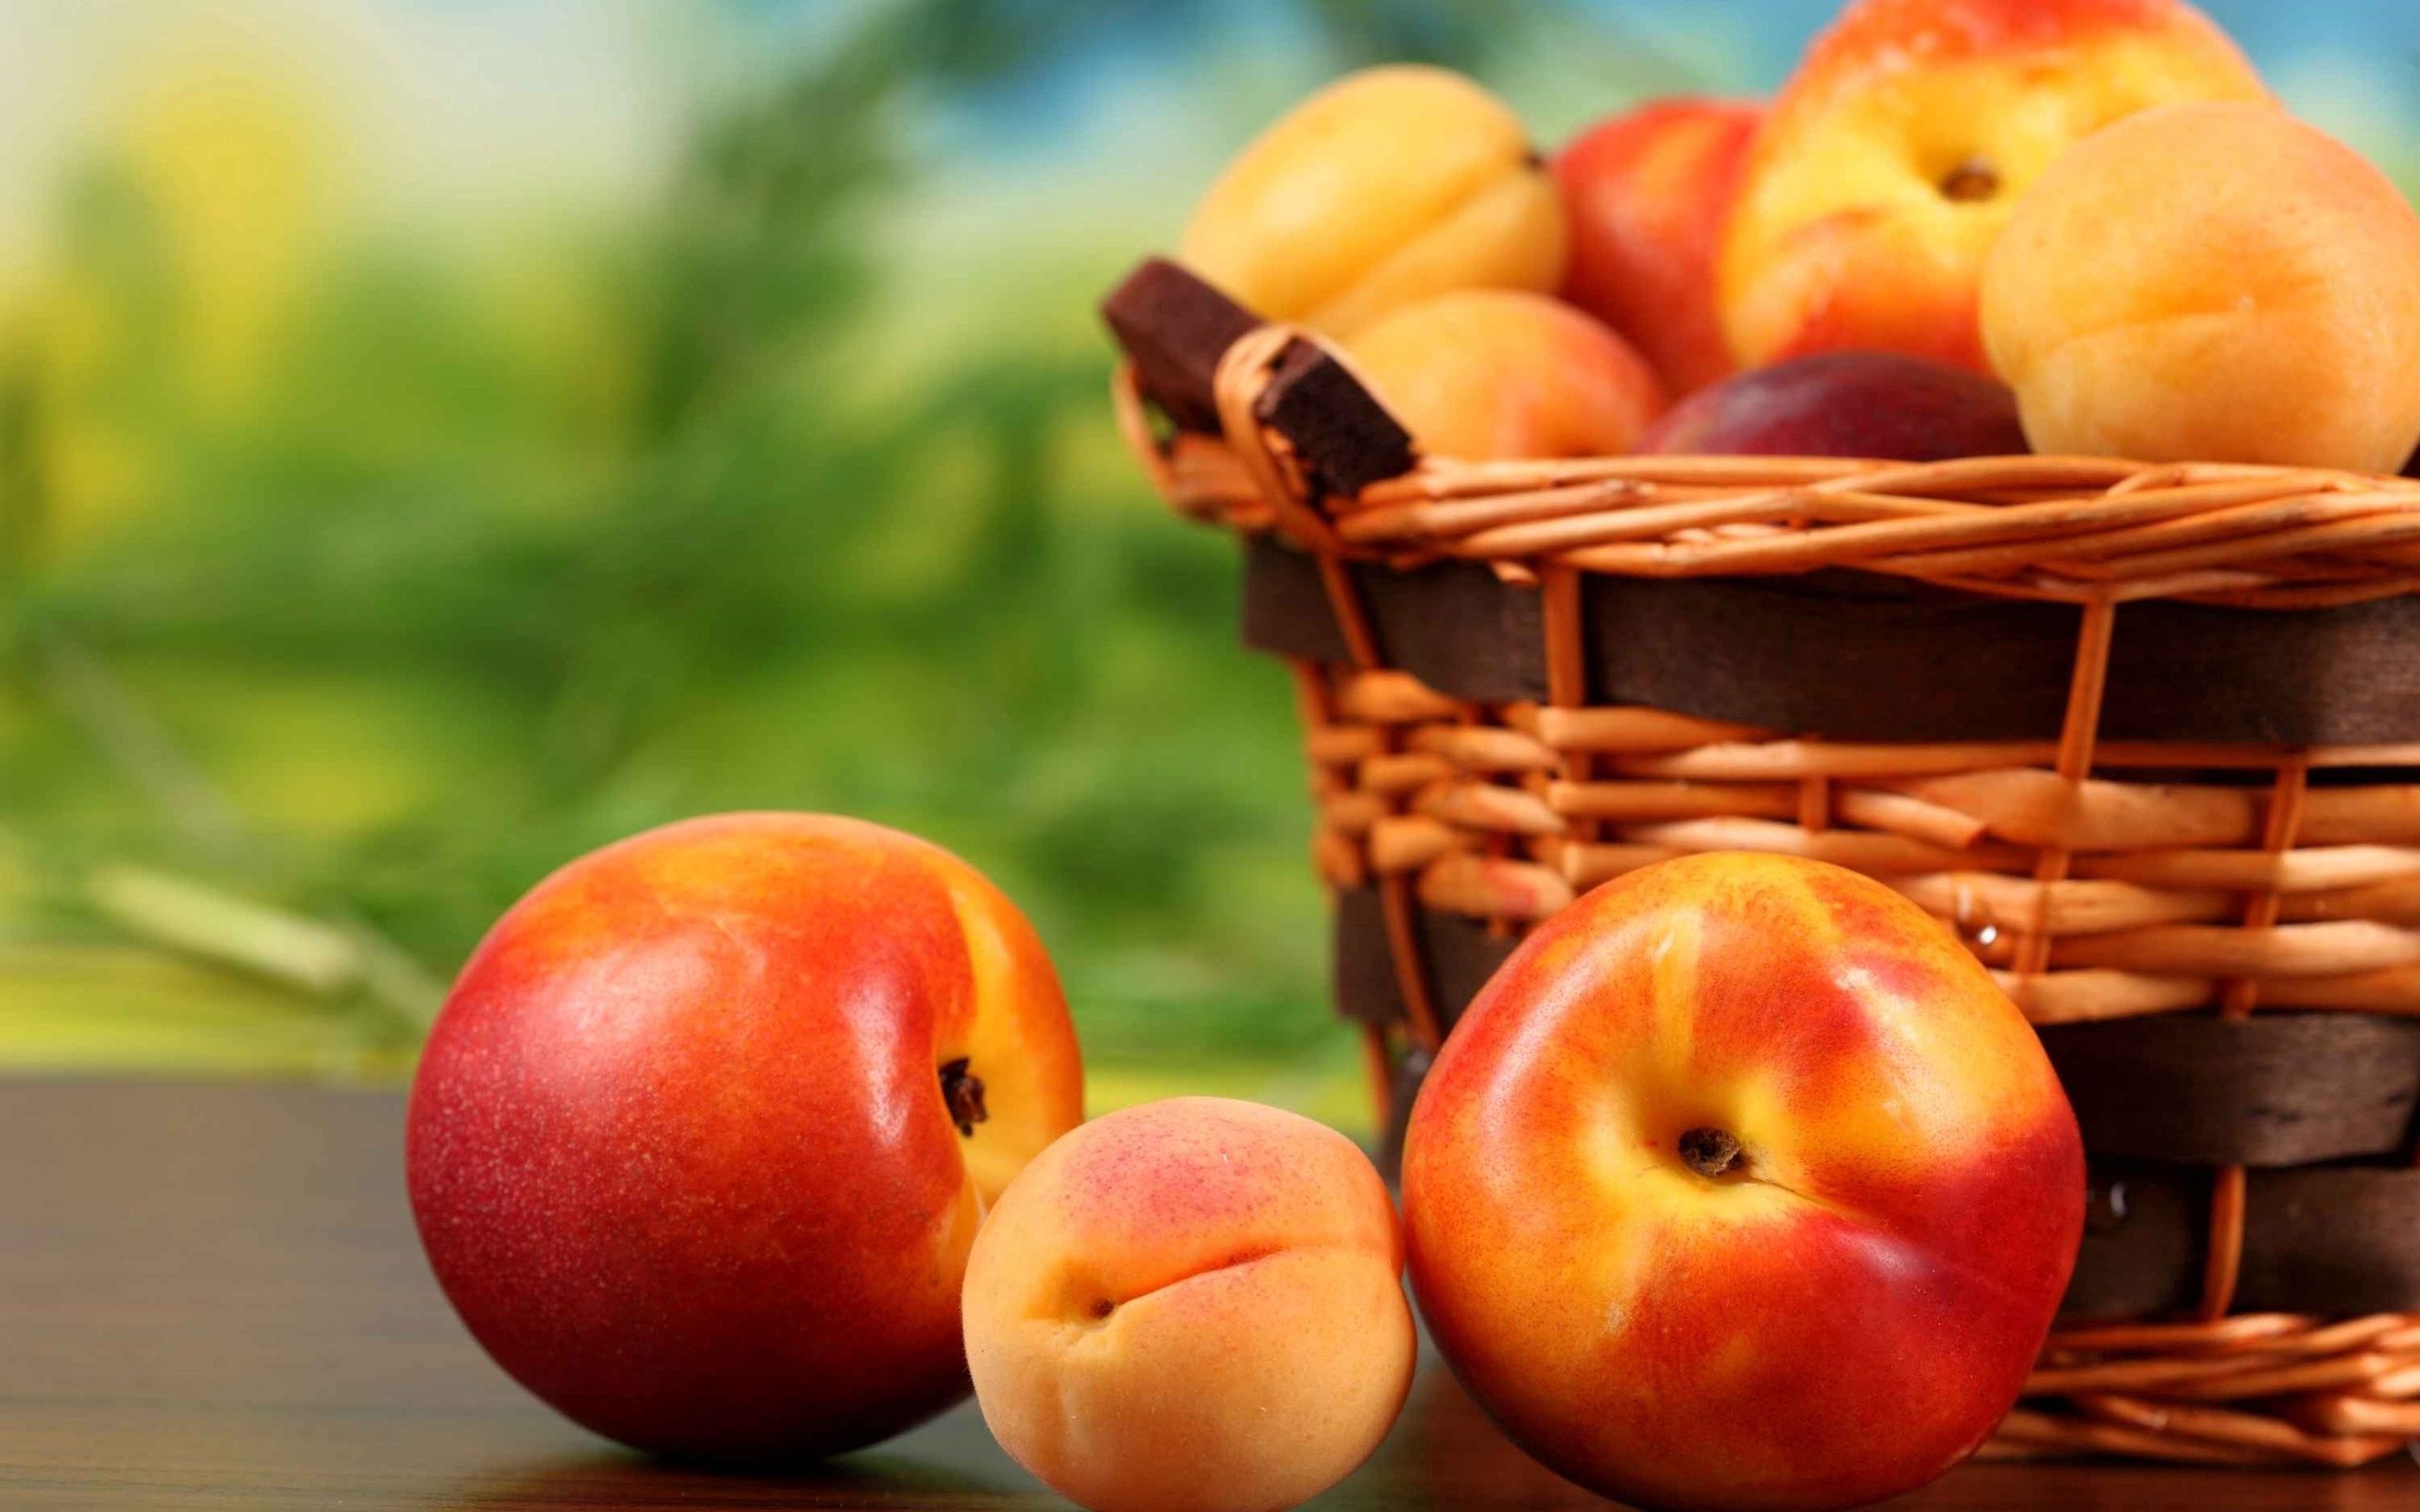 84398 download wallpaper fruits, food, peaches, fruit, apricots, nectarine screensavers and pictures for free